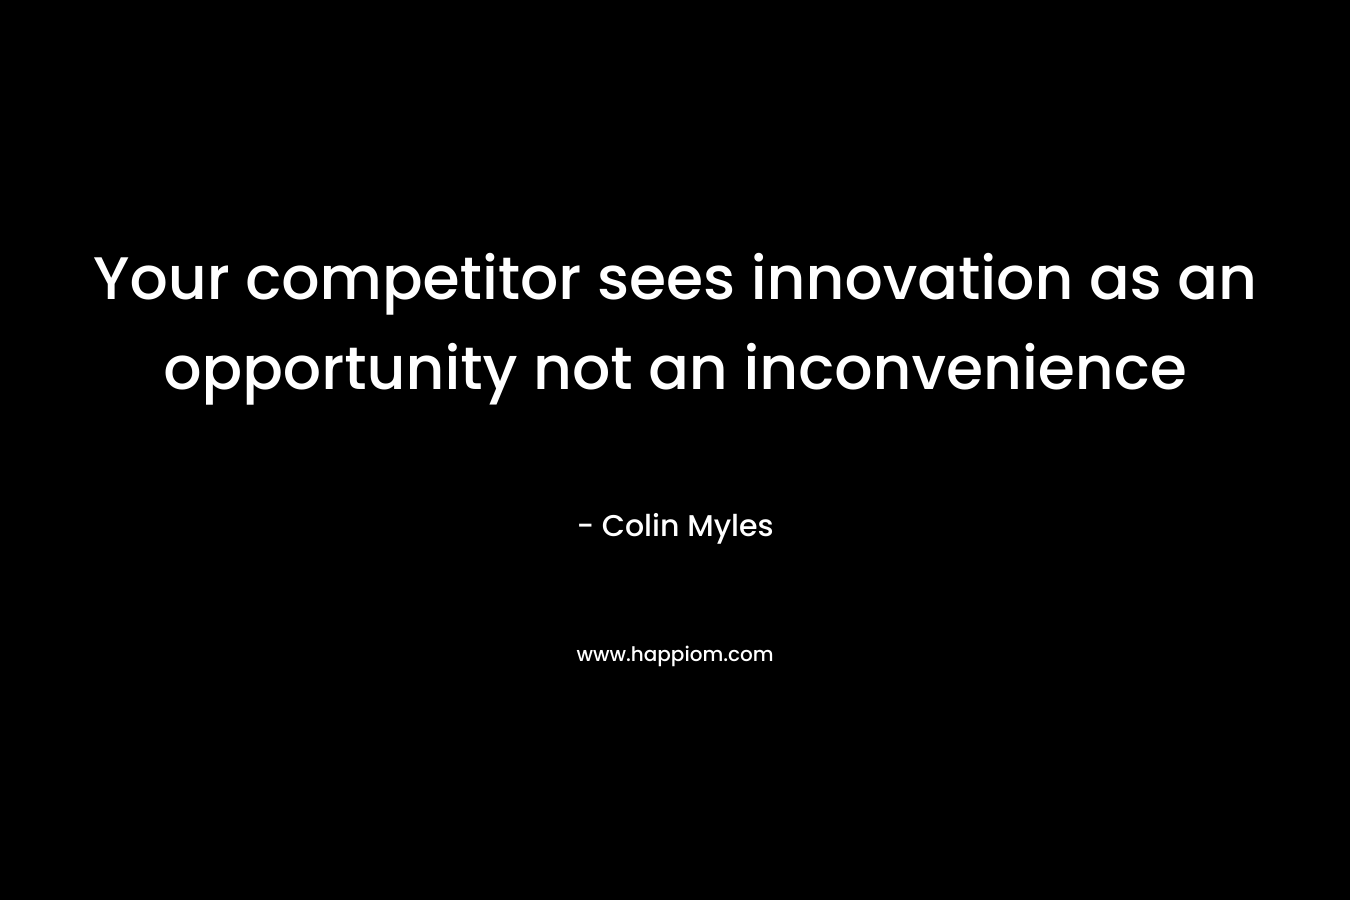 Your competitor sees innovation as an opportunity not an inconvenience